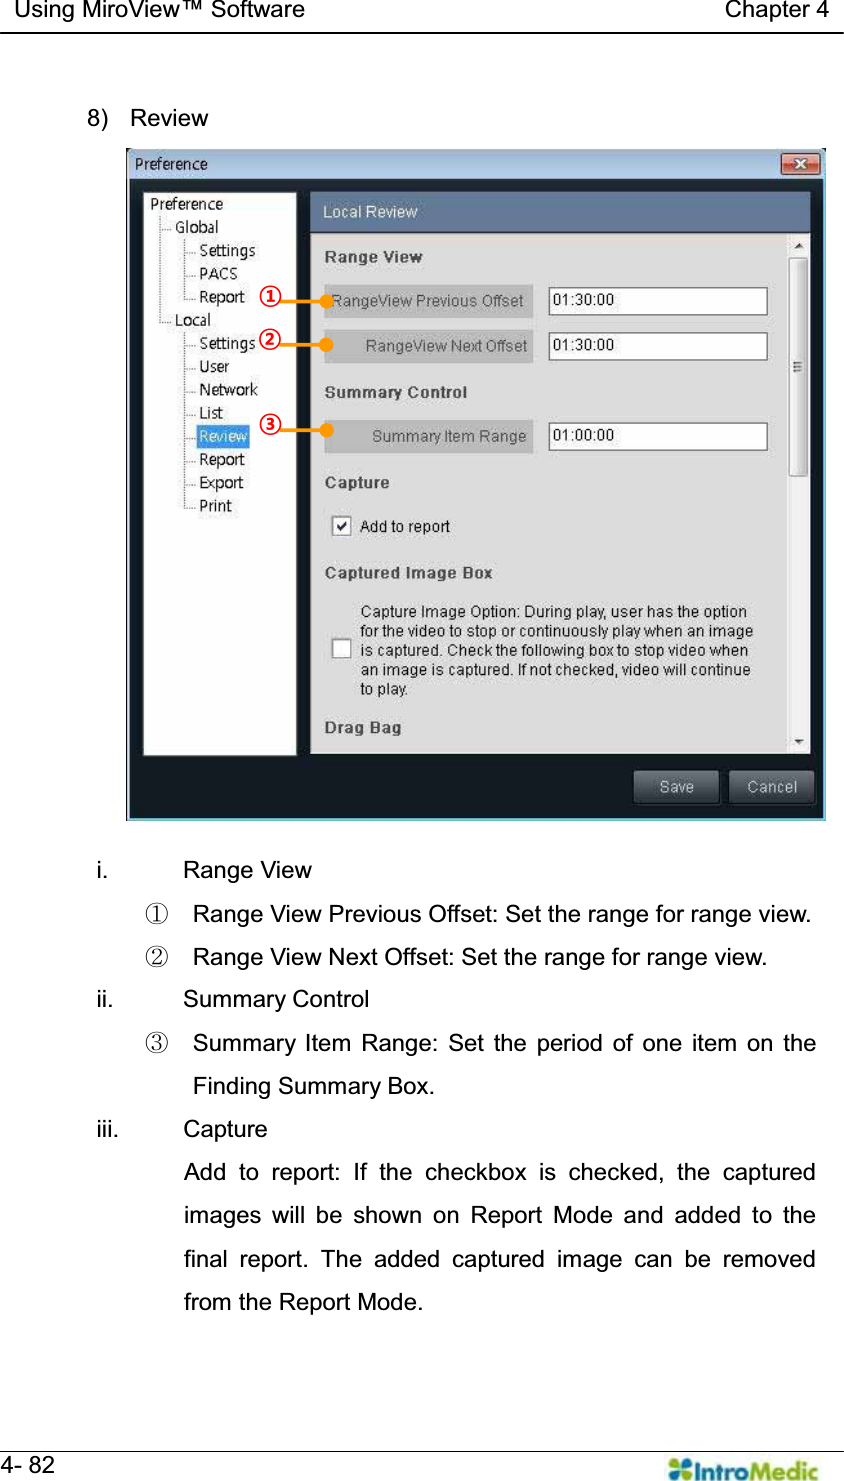   Using MiroView Software                                   Chapter 4   4- 82  8) Review  i. Range View ཛ  Range View Previous Offset: Set the range for range view. ཛྷ  Range View Next Offset: Set the range for range view. ii. Summary Control ཝ  Summary Item Range: Set the period of one item on the Finding Summary Box. iii. Capture Add to report: If the checkbox is checked, the captured images will be shown on Report Mode and added to the final report. The added captured image can be removed from the Report Mode. ¢ £ ¤ 